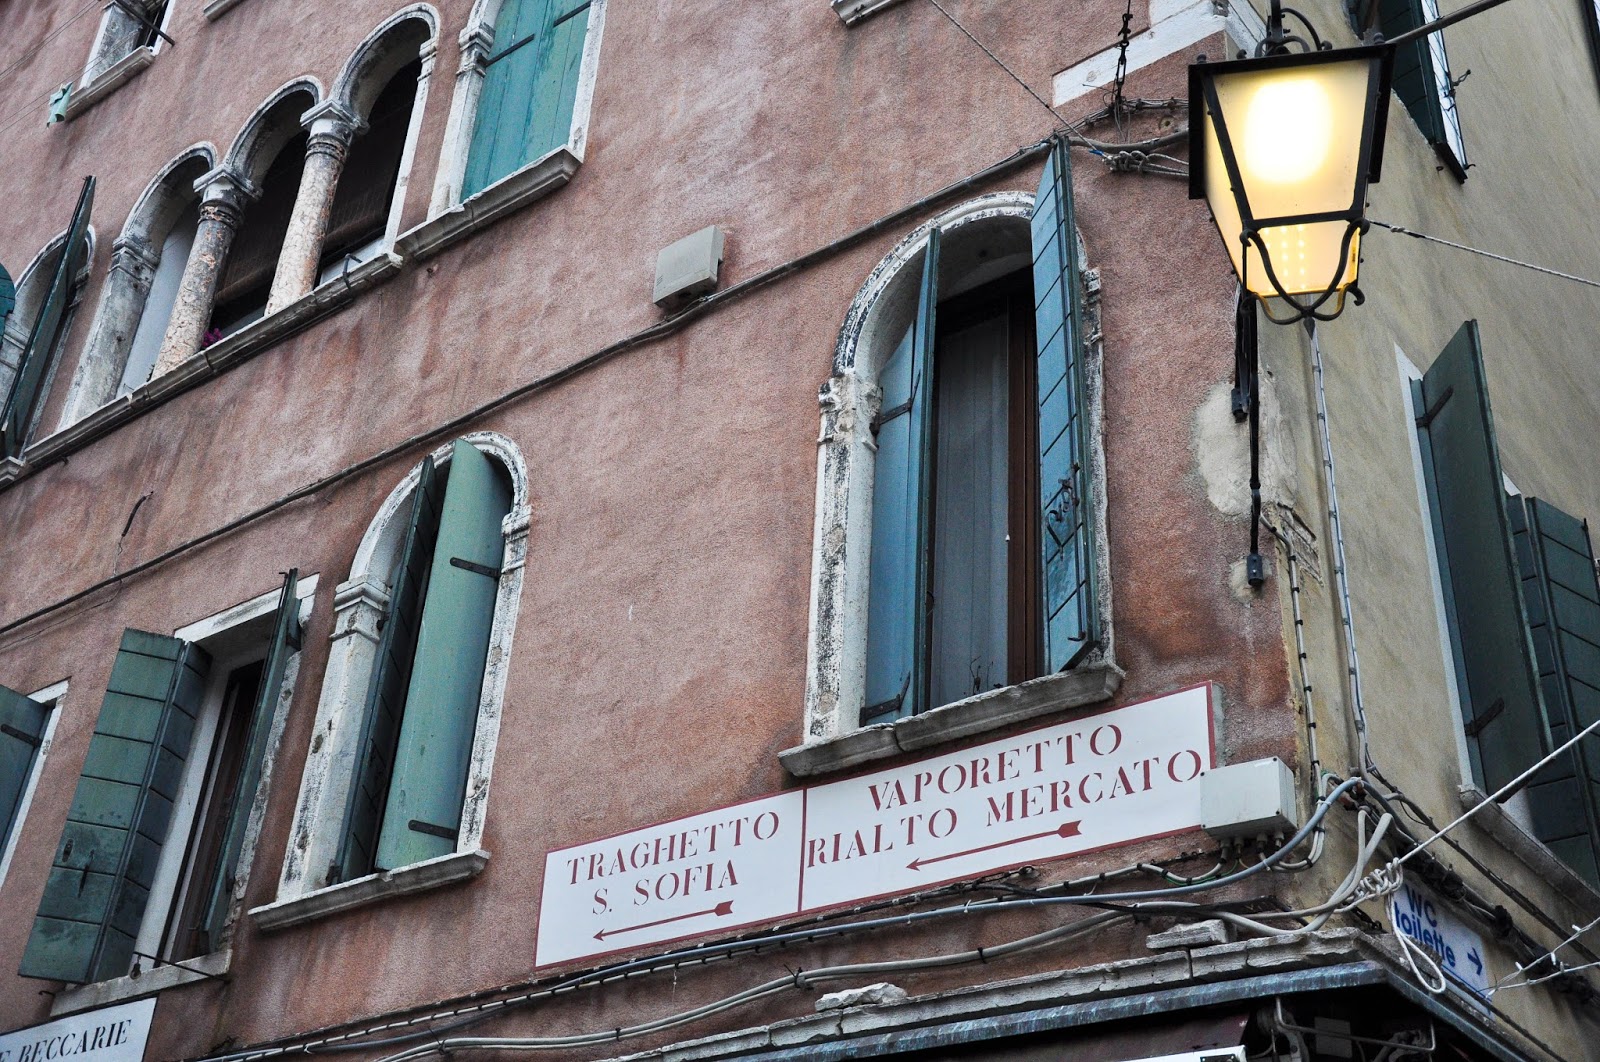 Sign pointing to a traghetto stop, Venice, Italy